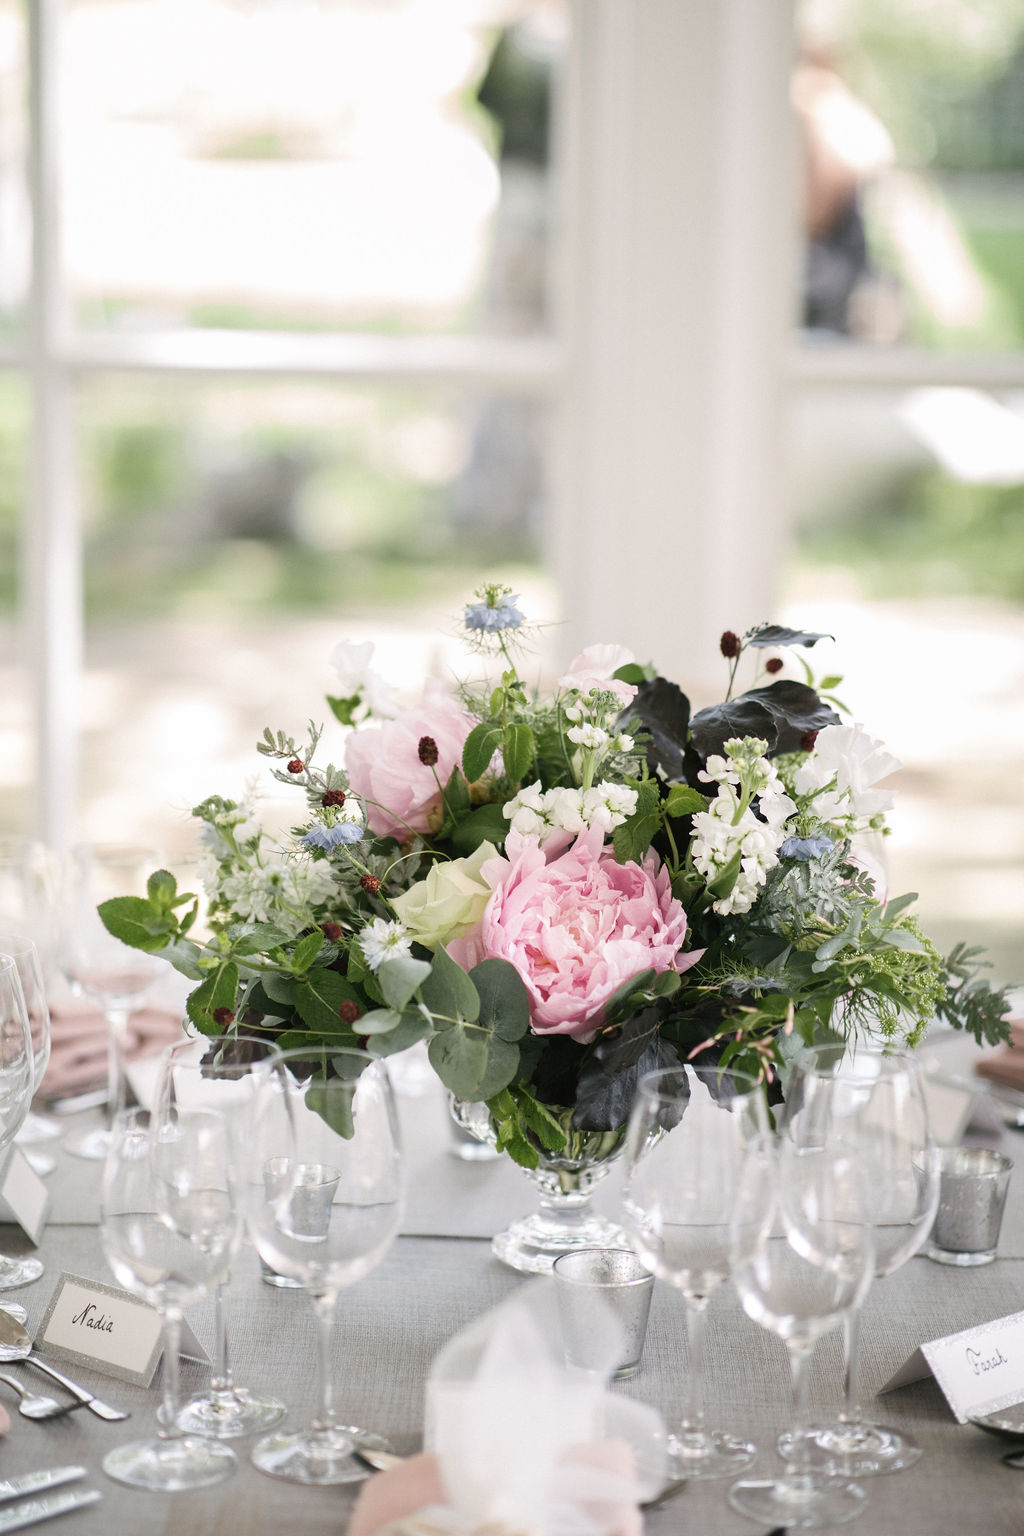 Wedding table centrepiece with pretty pink peonies at The Orangery, Holland Park, London. Photo by Kari Bellamy